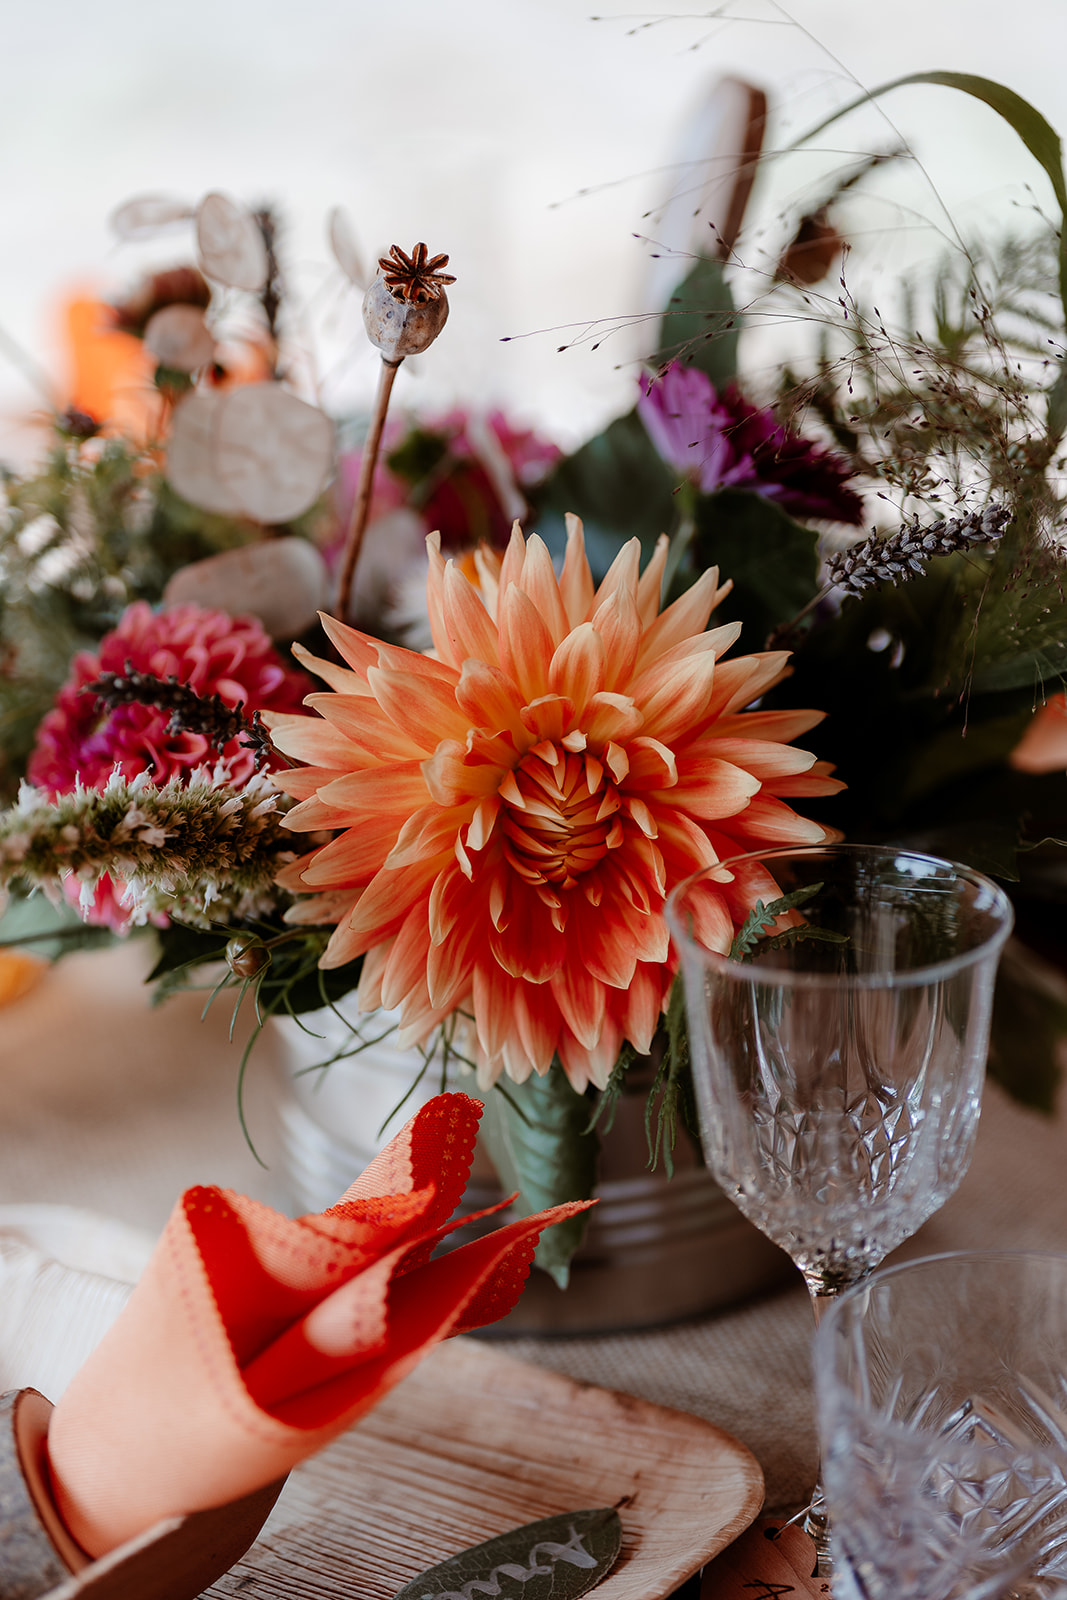 Boho wedding on a flower farm with lots of personal touches